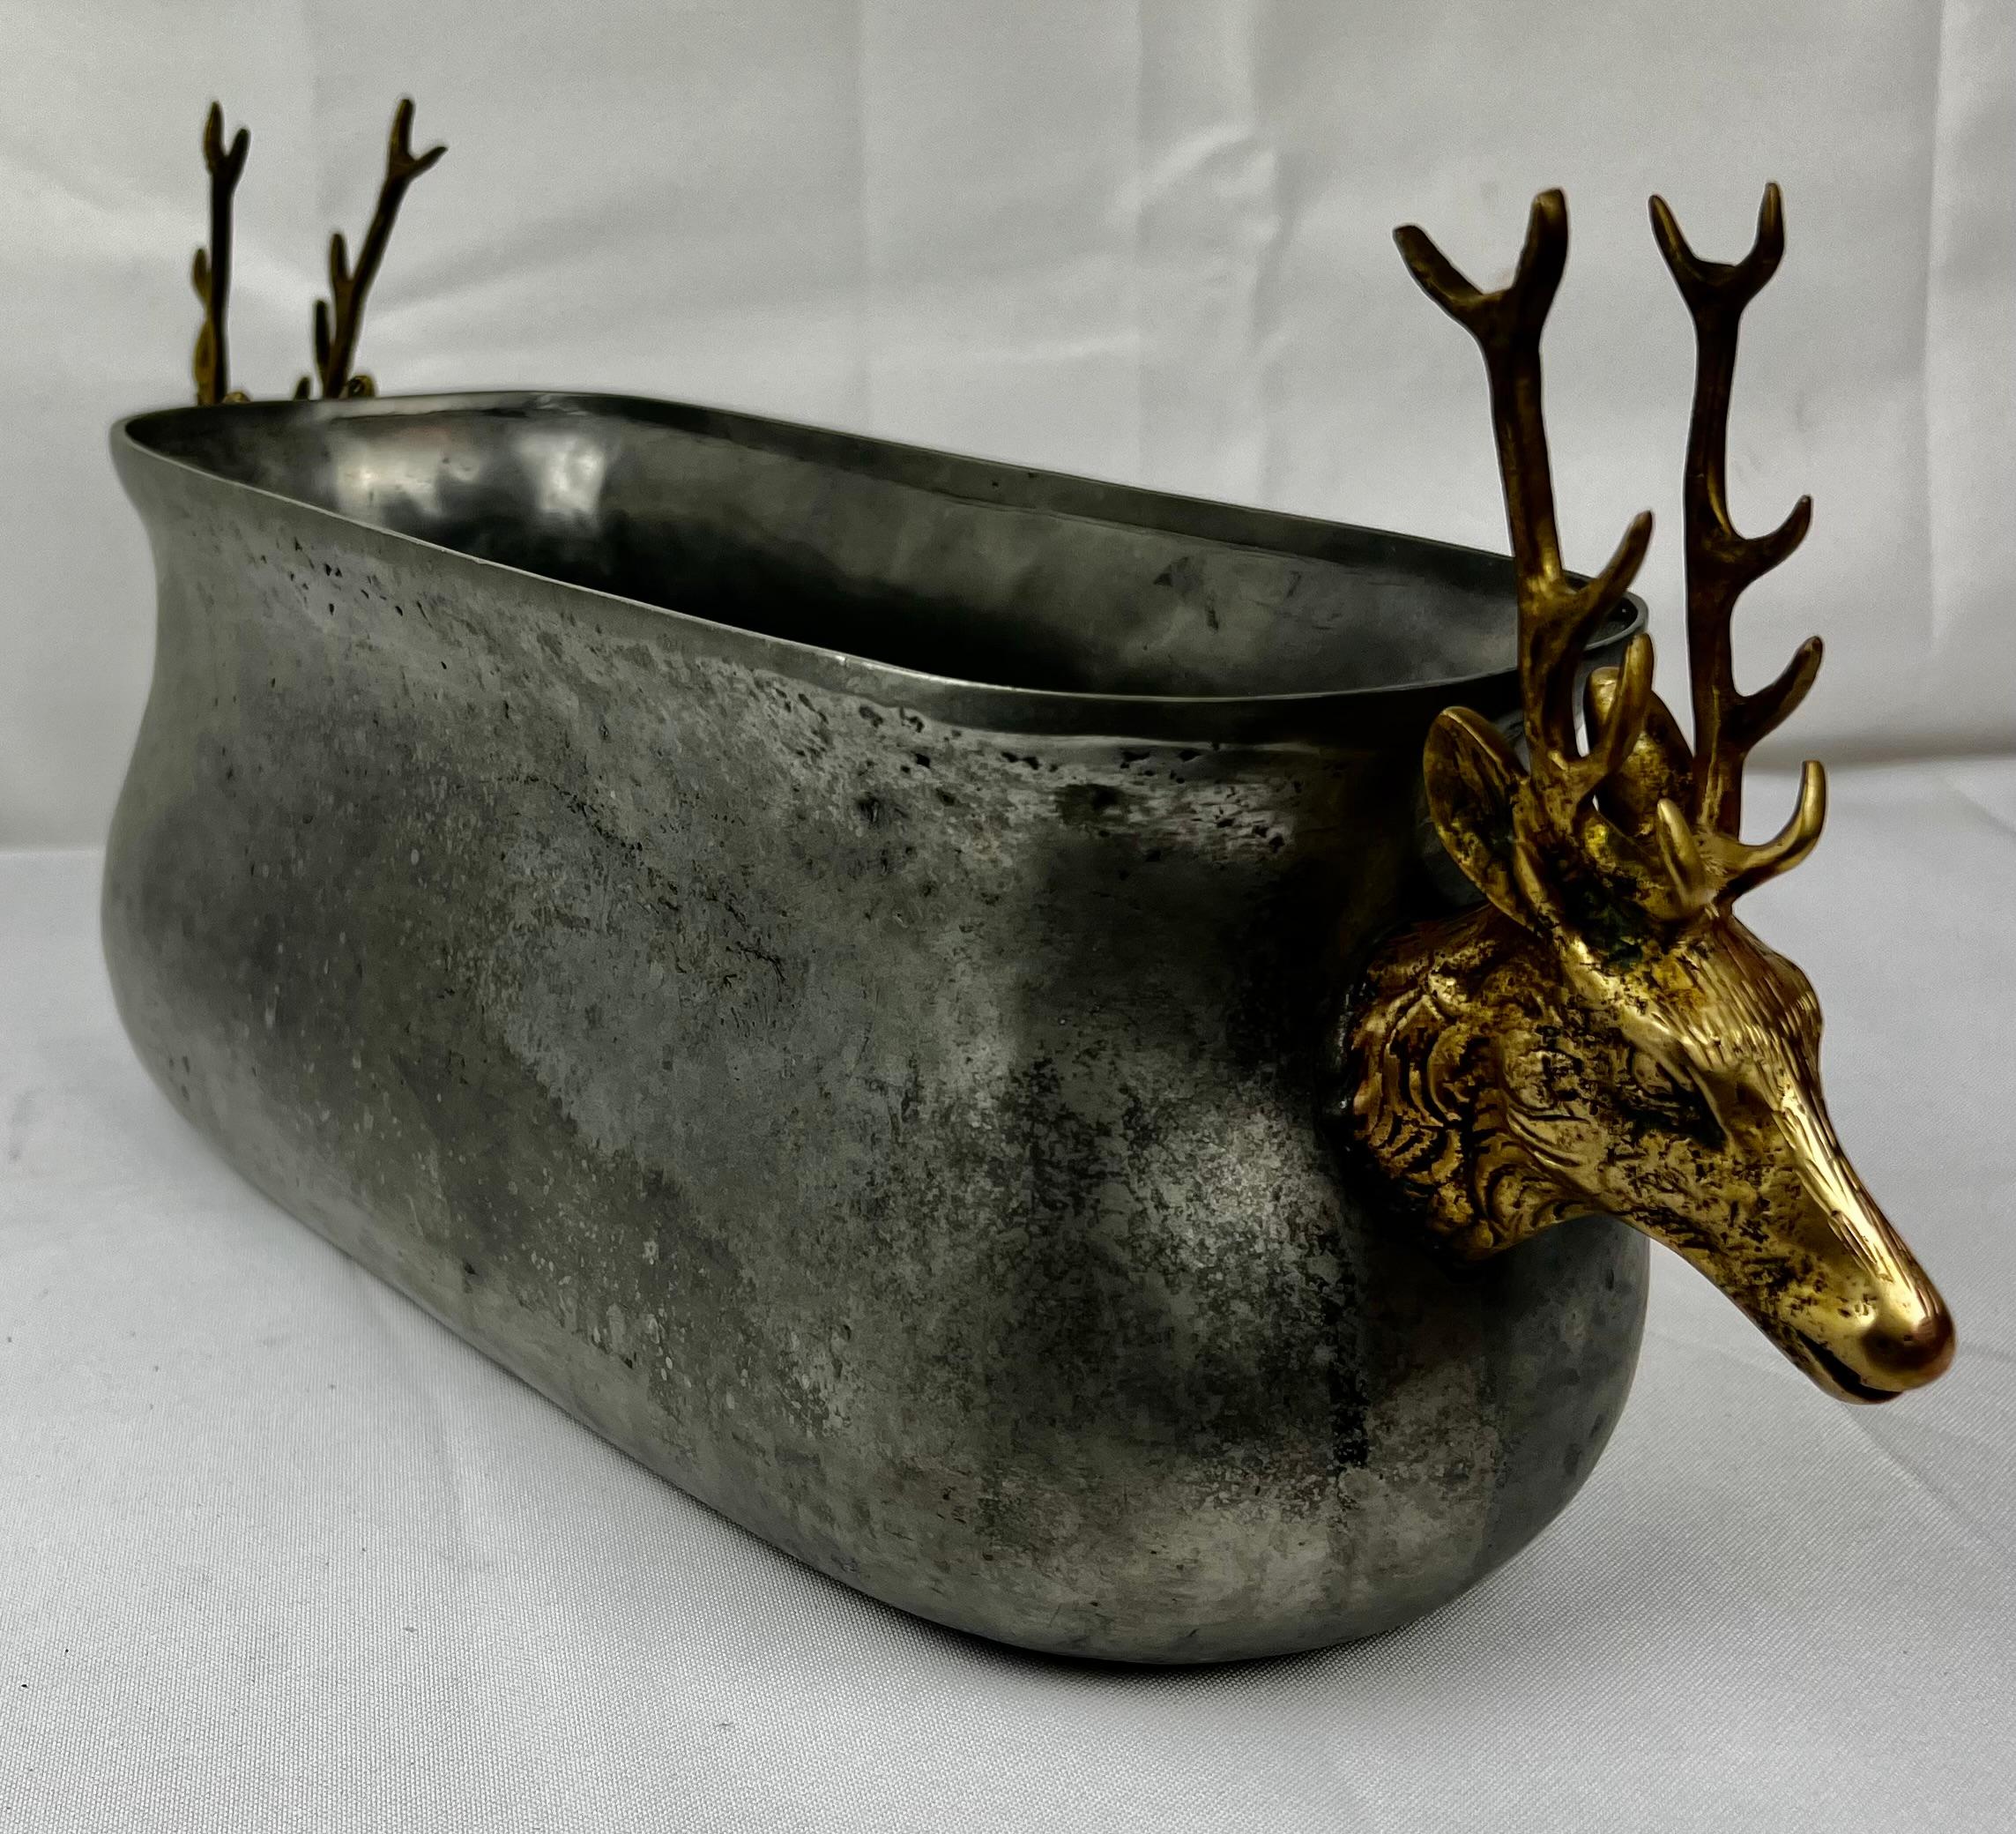 Hand made solid pewter container with brass stag head handles. It could be used a s a centerpiece, planter or even to chill bottles of wine.
Clearly marked on the underside “Fecit (he made) VCM made in Portugal. It was purchased in Saks Fifth